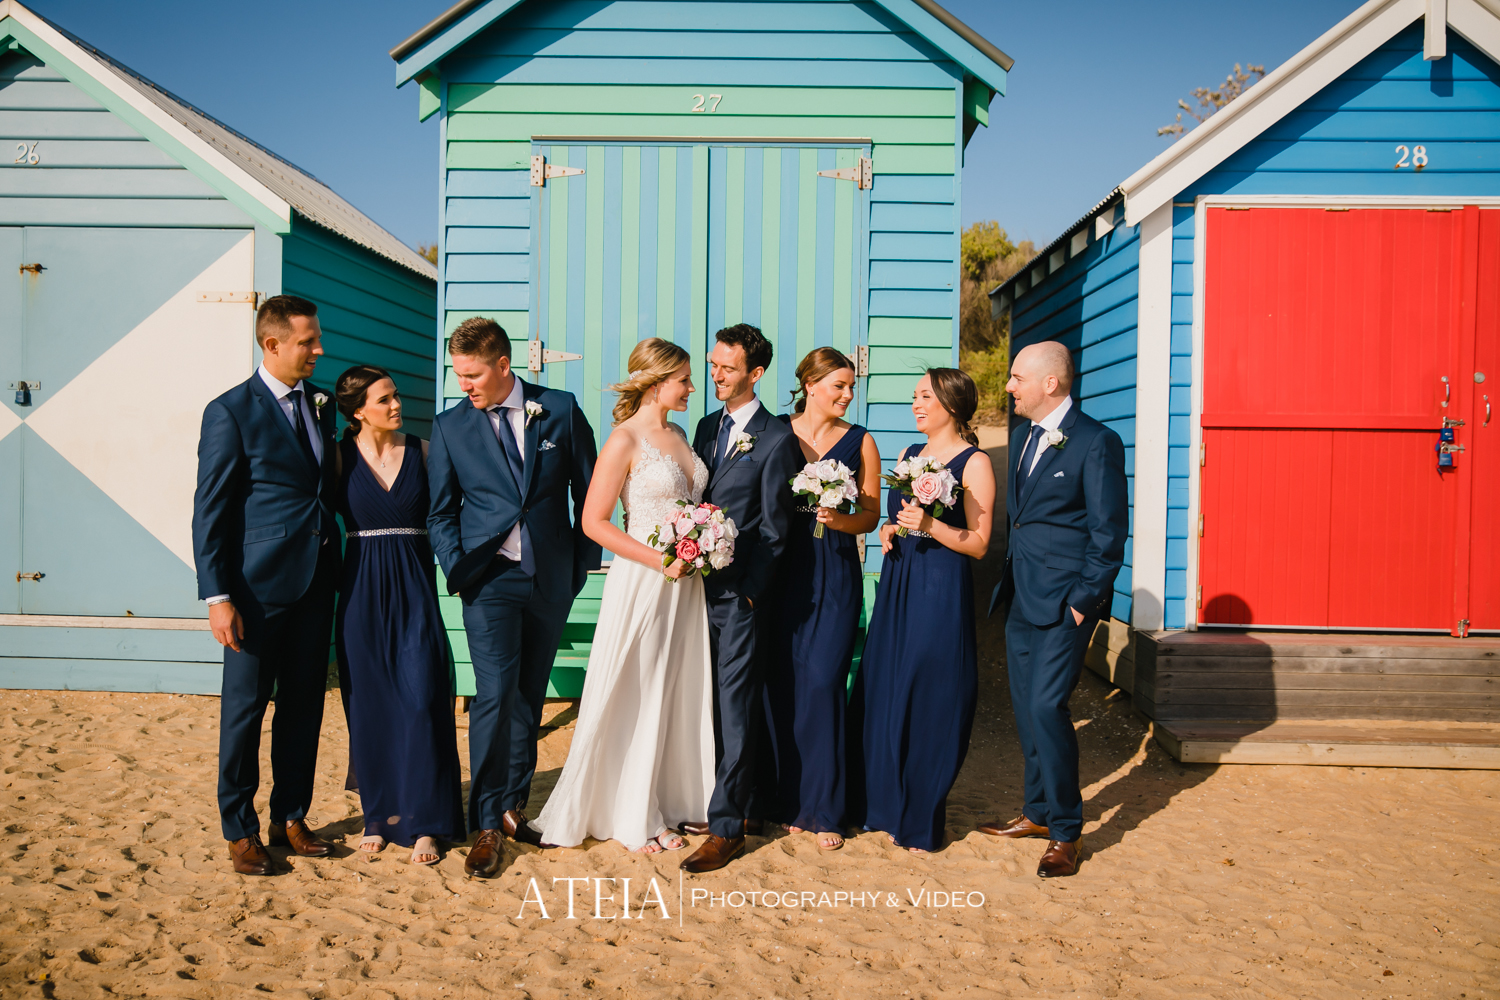 , Brighton Savoy Wedding Photography Melbourne by ATEIA Photography &#038; Video